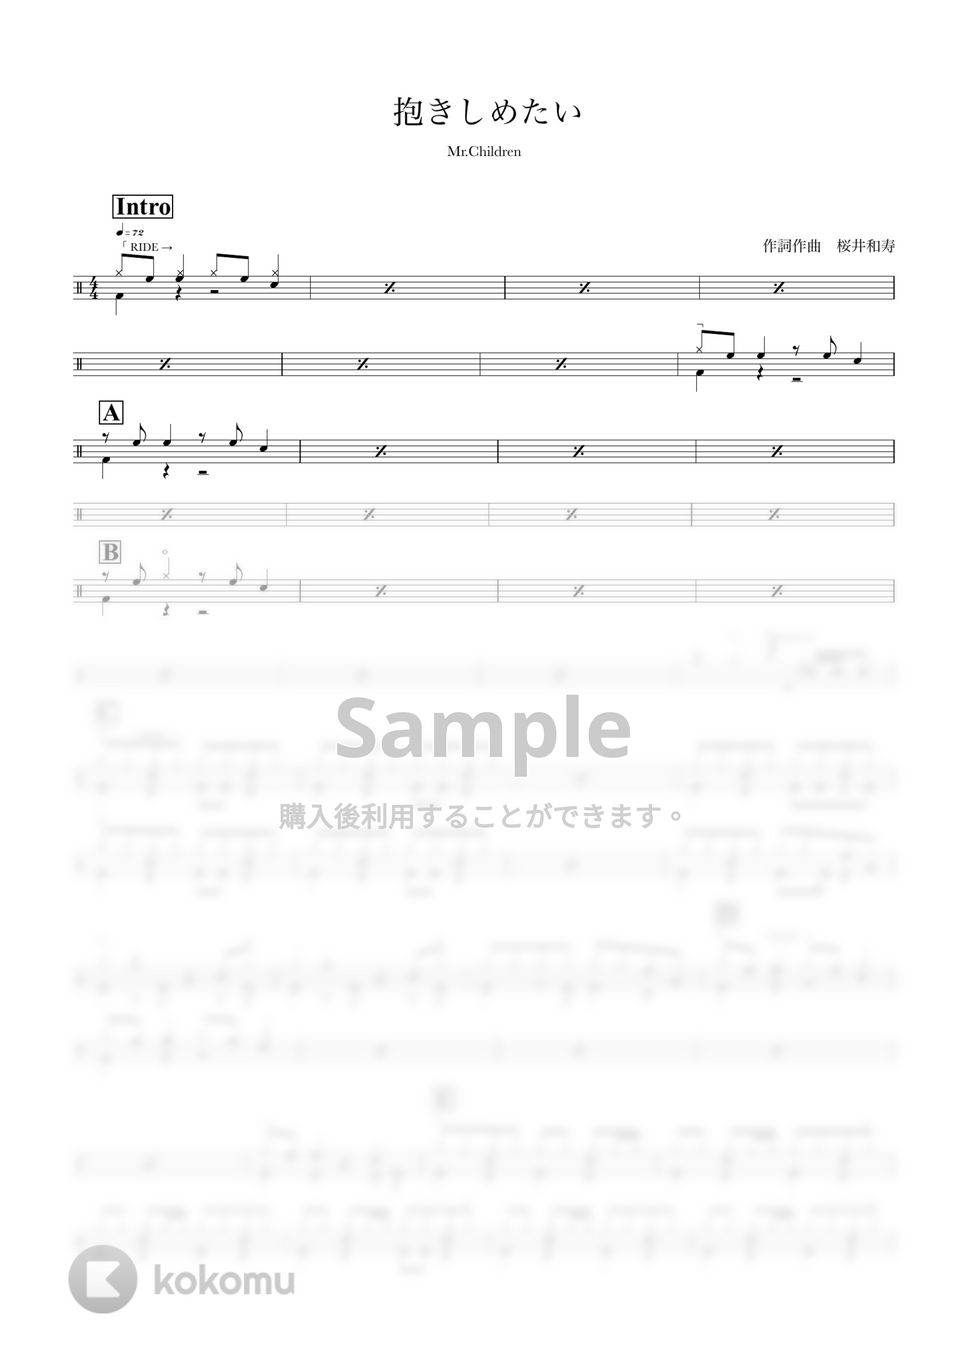 Mr.Children - 抱きしめたい by ONEDRUMS